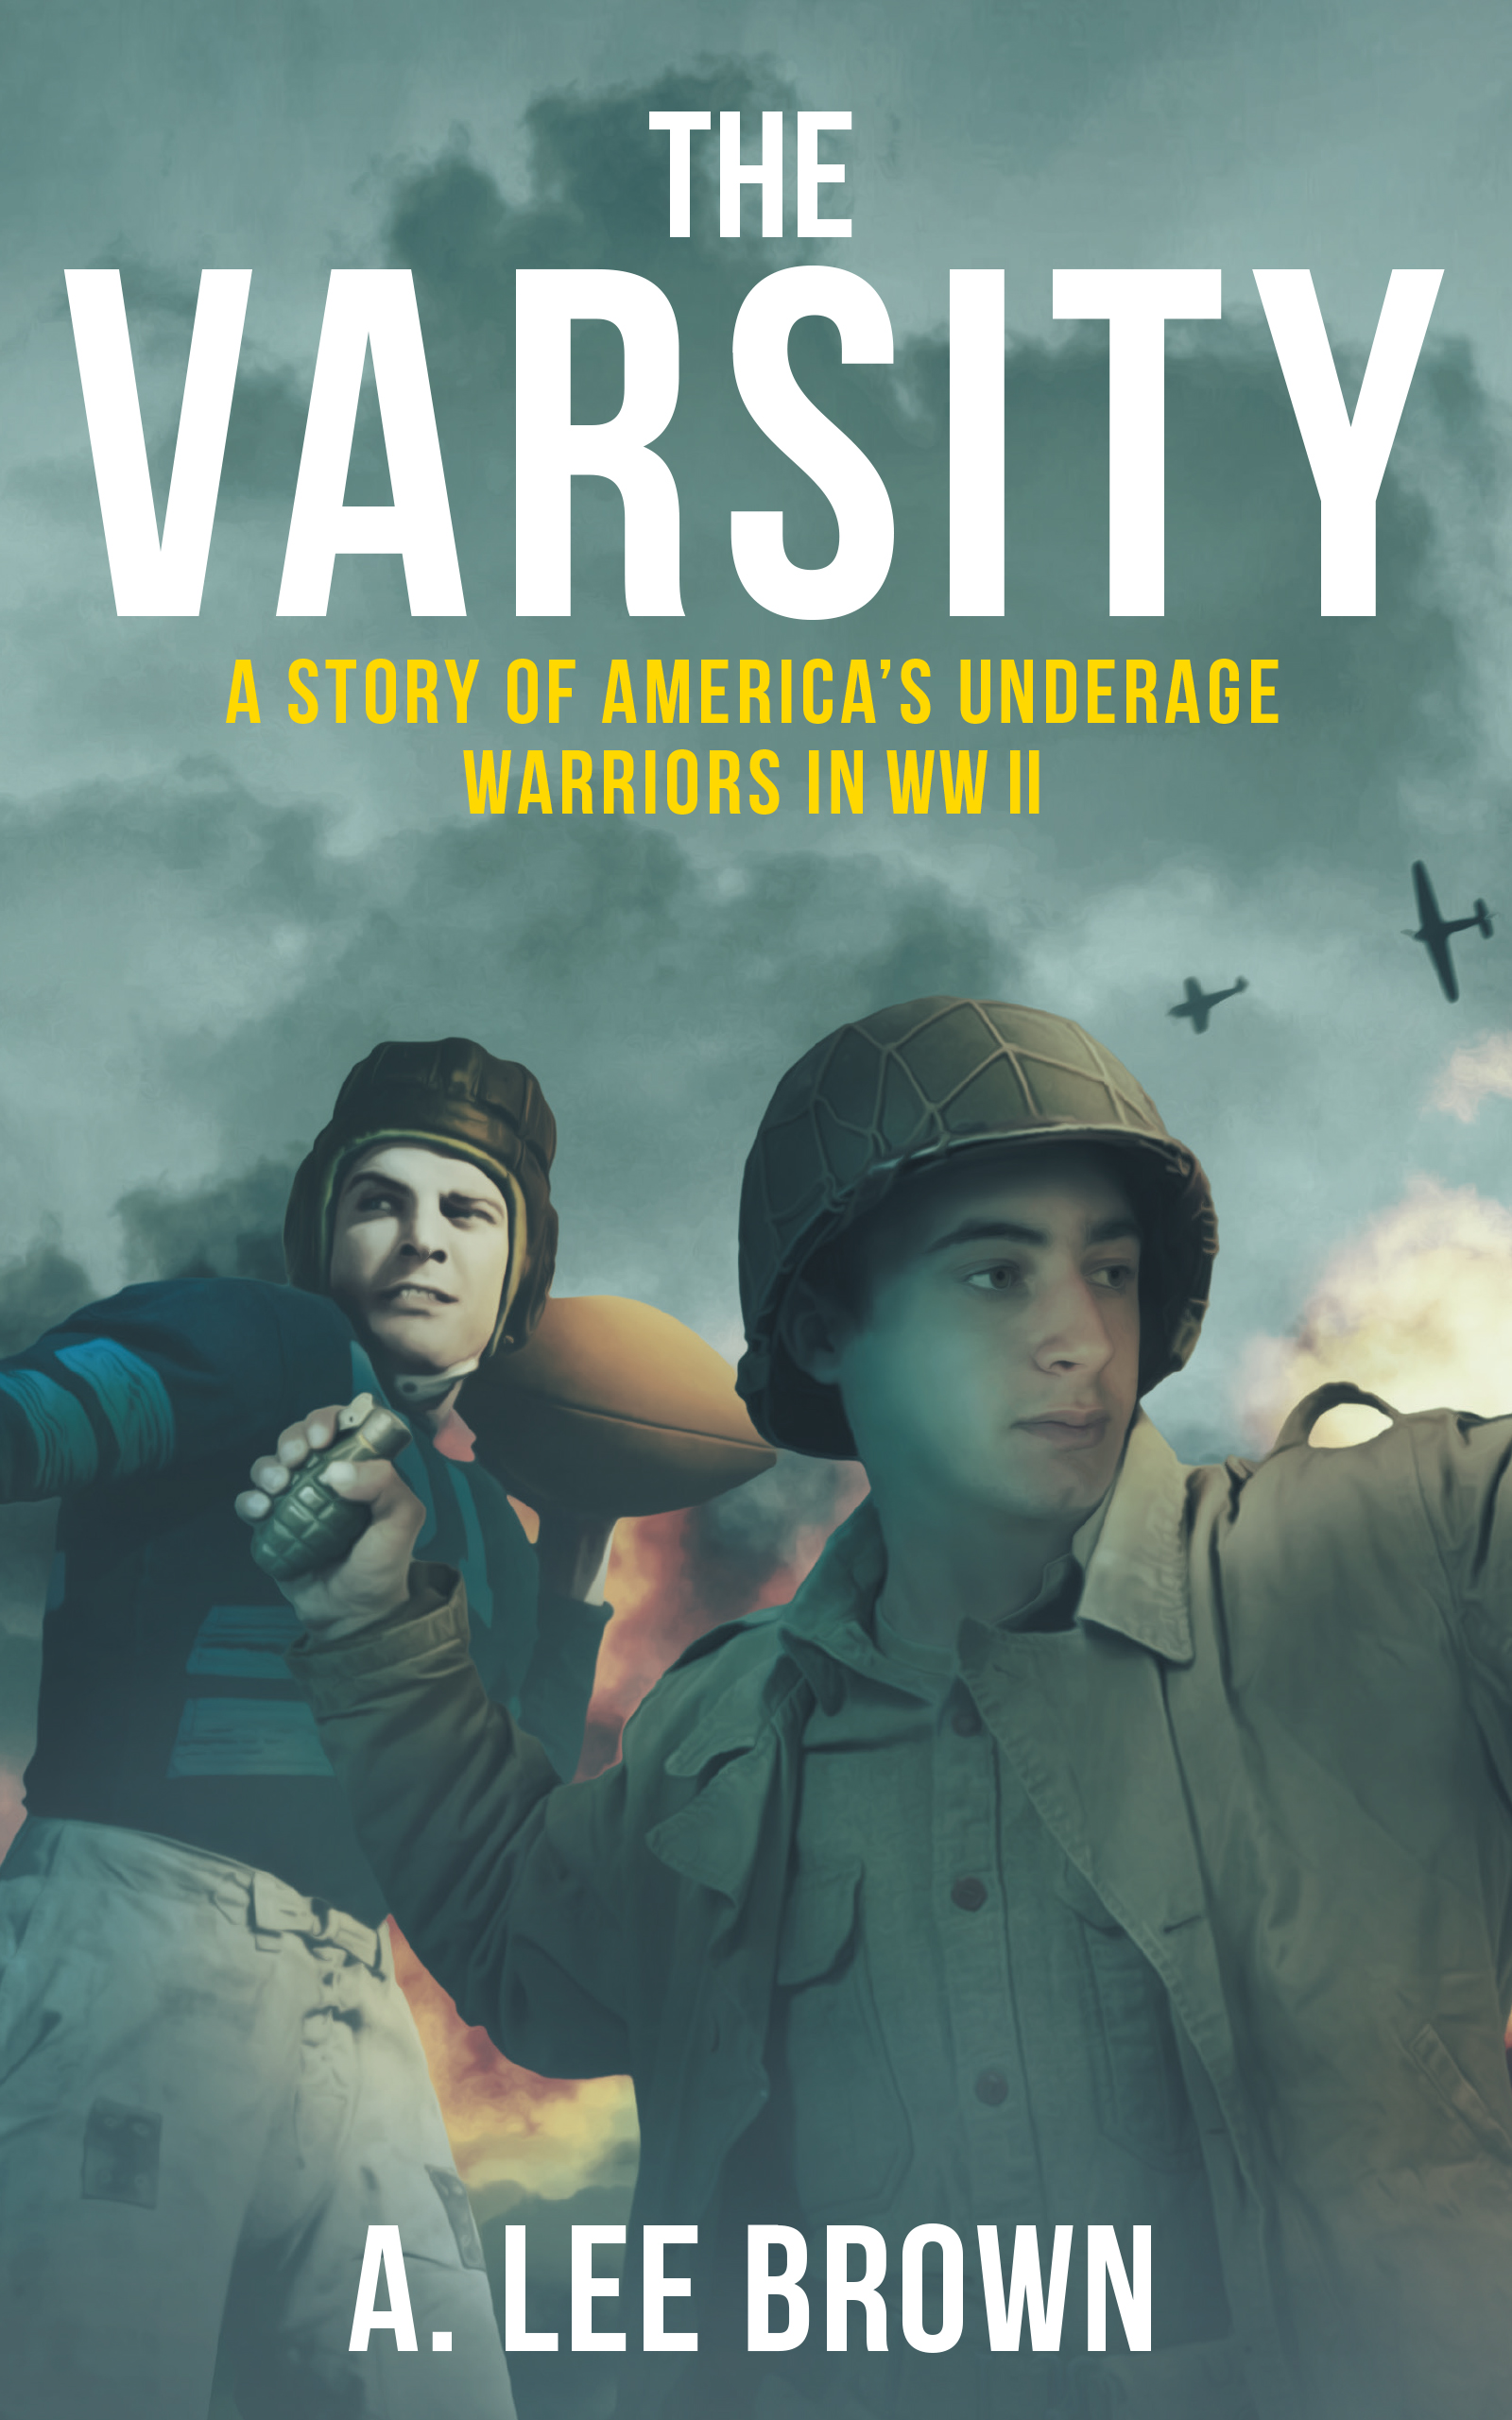 The Varsity book cover